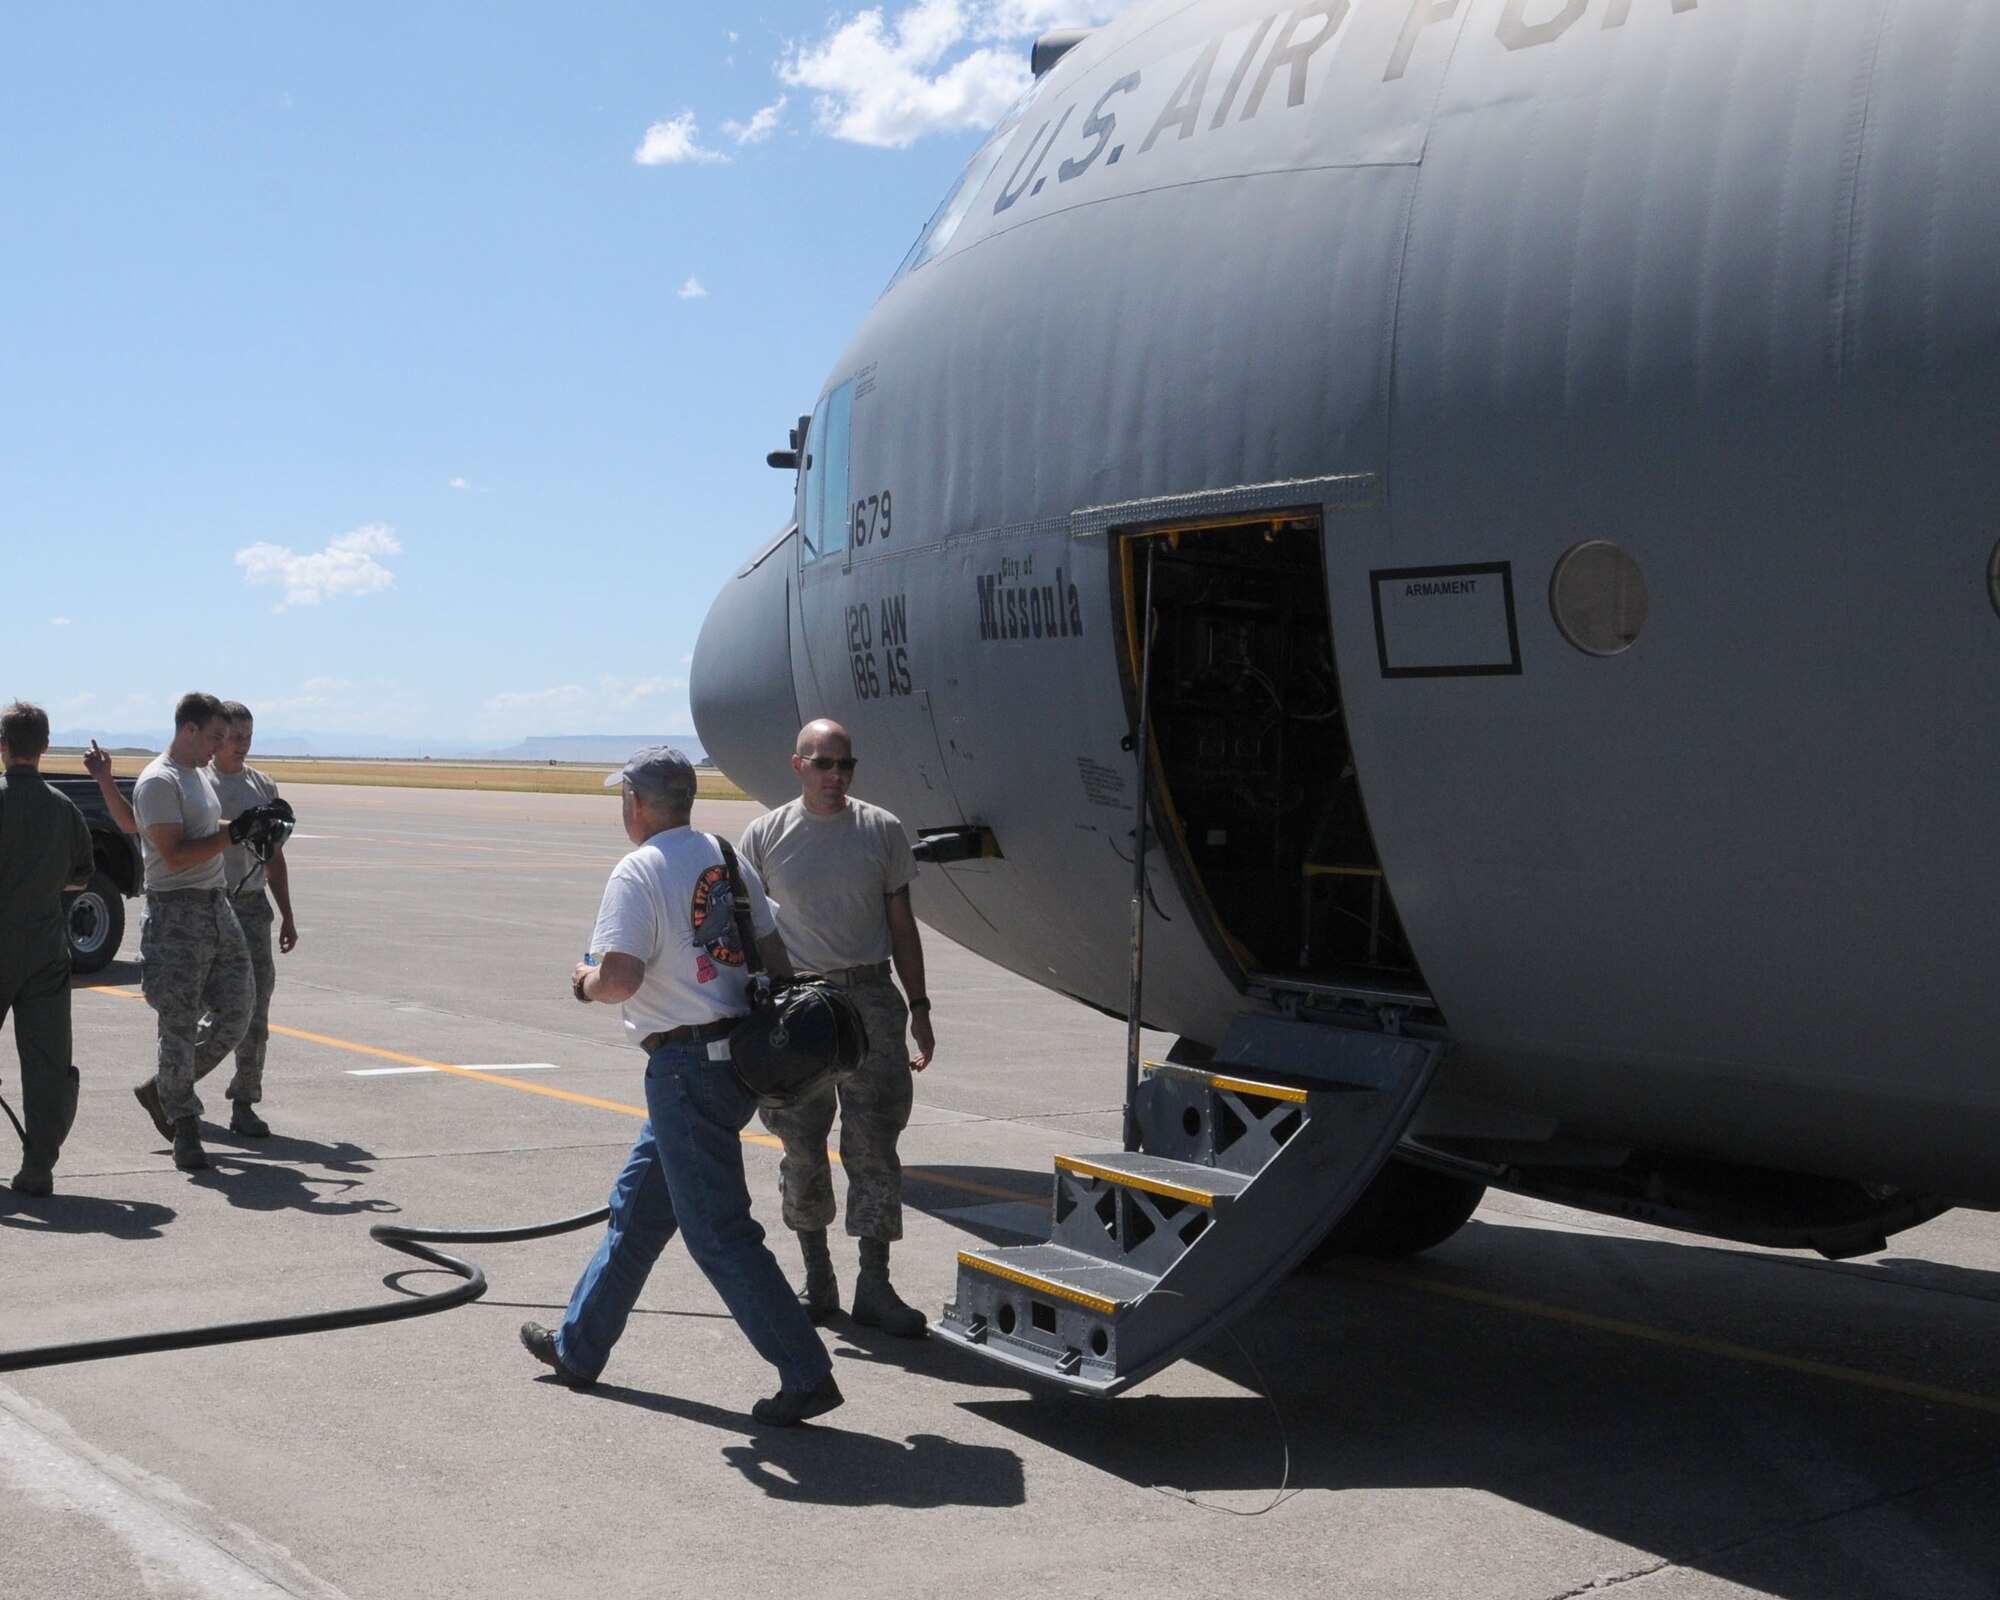 Robert Marquard steps off a C-130 Hercules aircraft July 20 at Great Falls International Airport in Great Falls, Mont. Marquard was the first space-available passenger transported by the 120th Airlift Wing. (U.S. Air National Guard photo / Tech. Sgt. Michael Touchette)